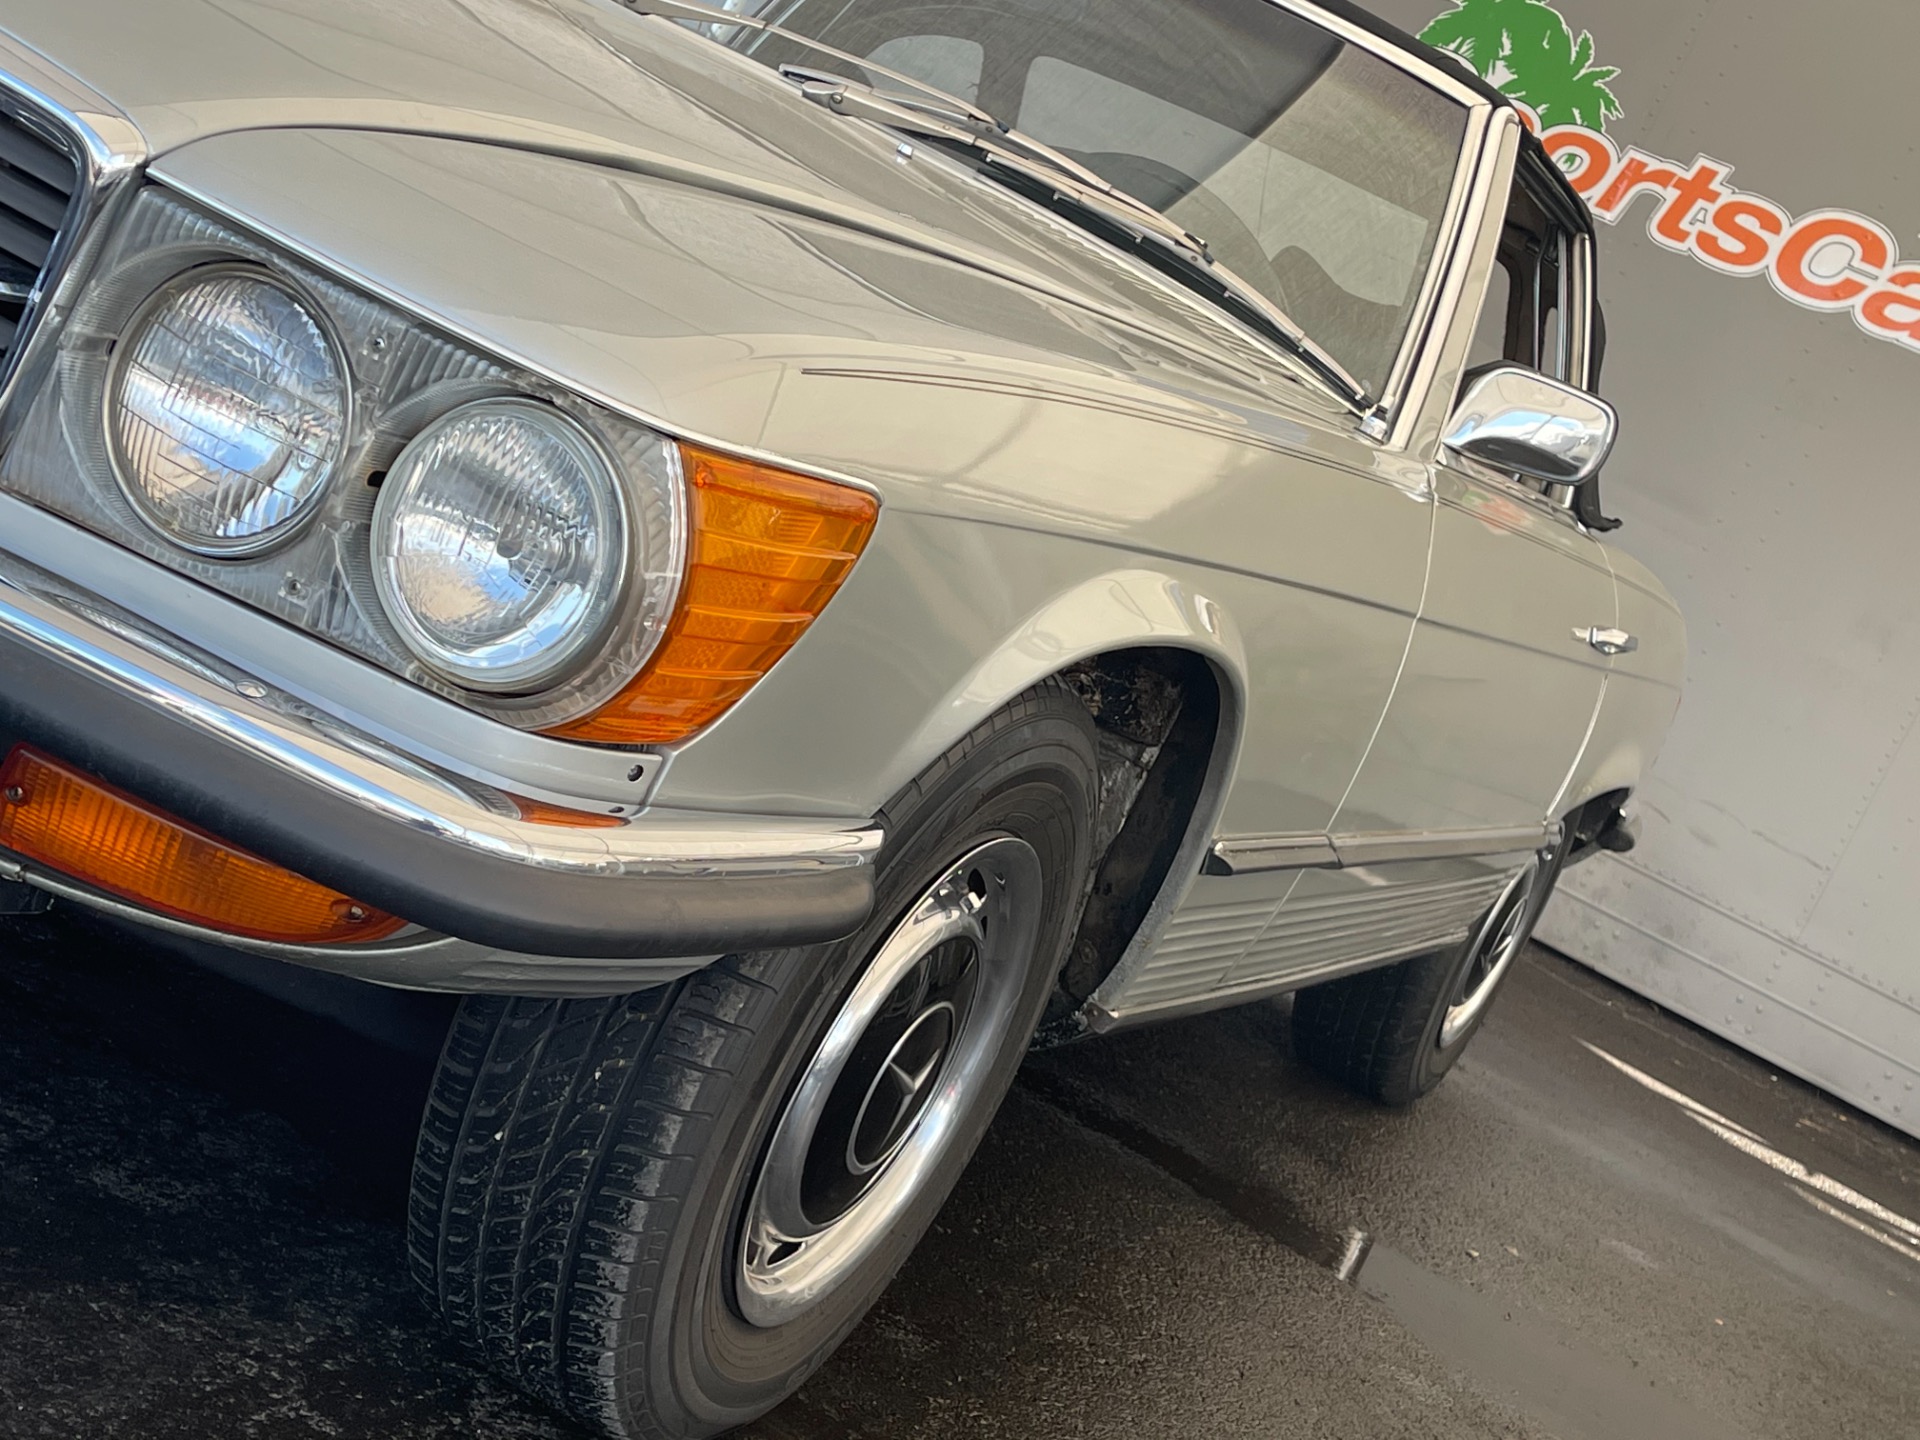 Used 1972 Mercedes Benz 450 Class 450 SL